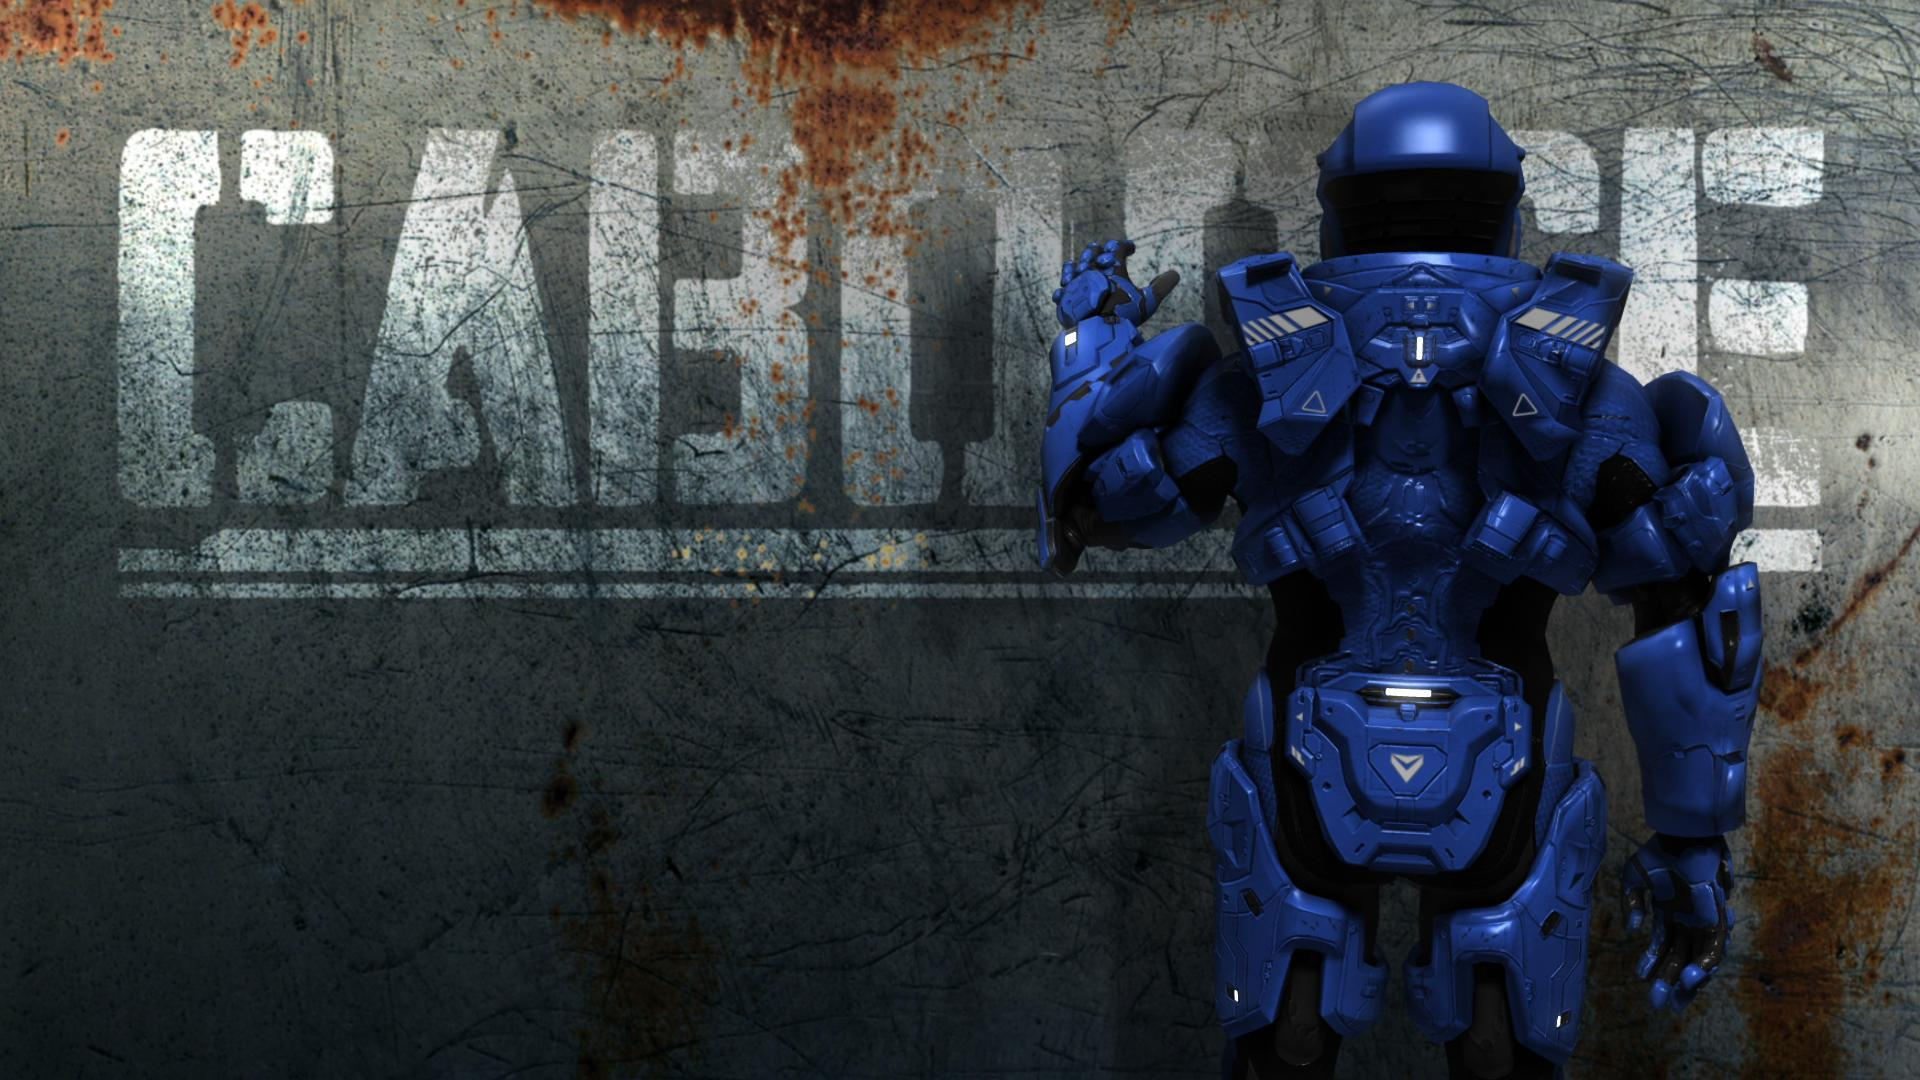 1920x1080 Halo Red Vs Blue Project Freelancer Wallpapers